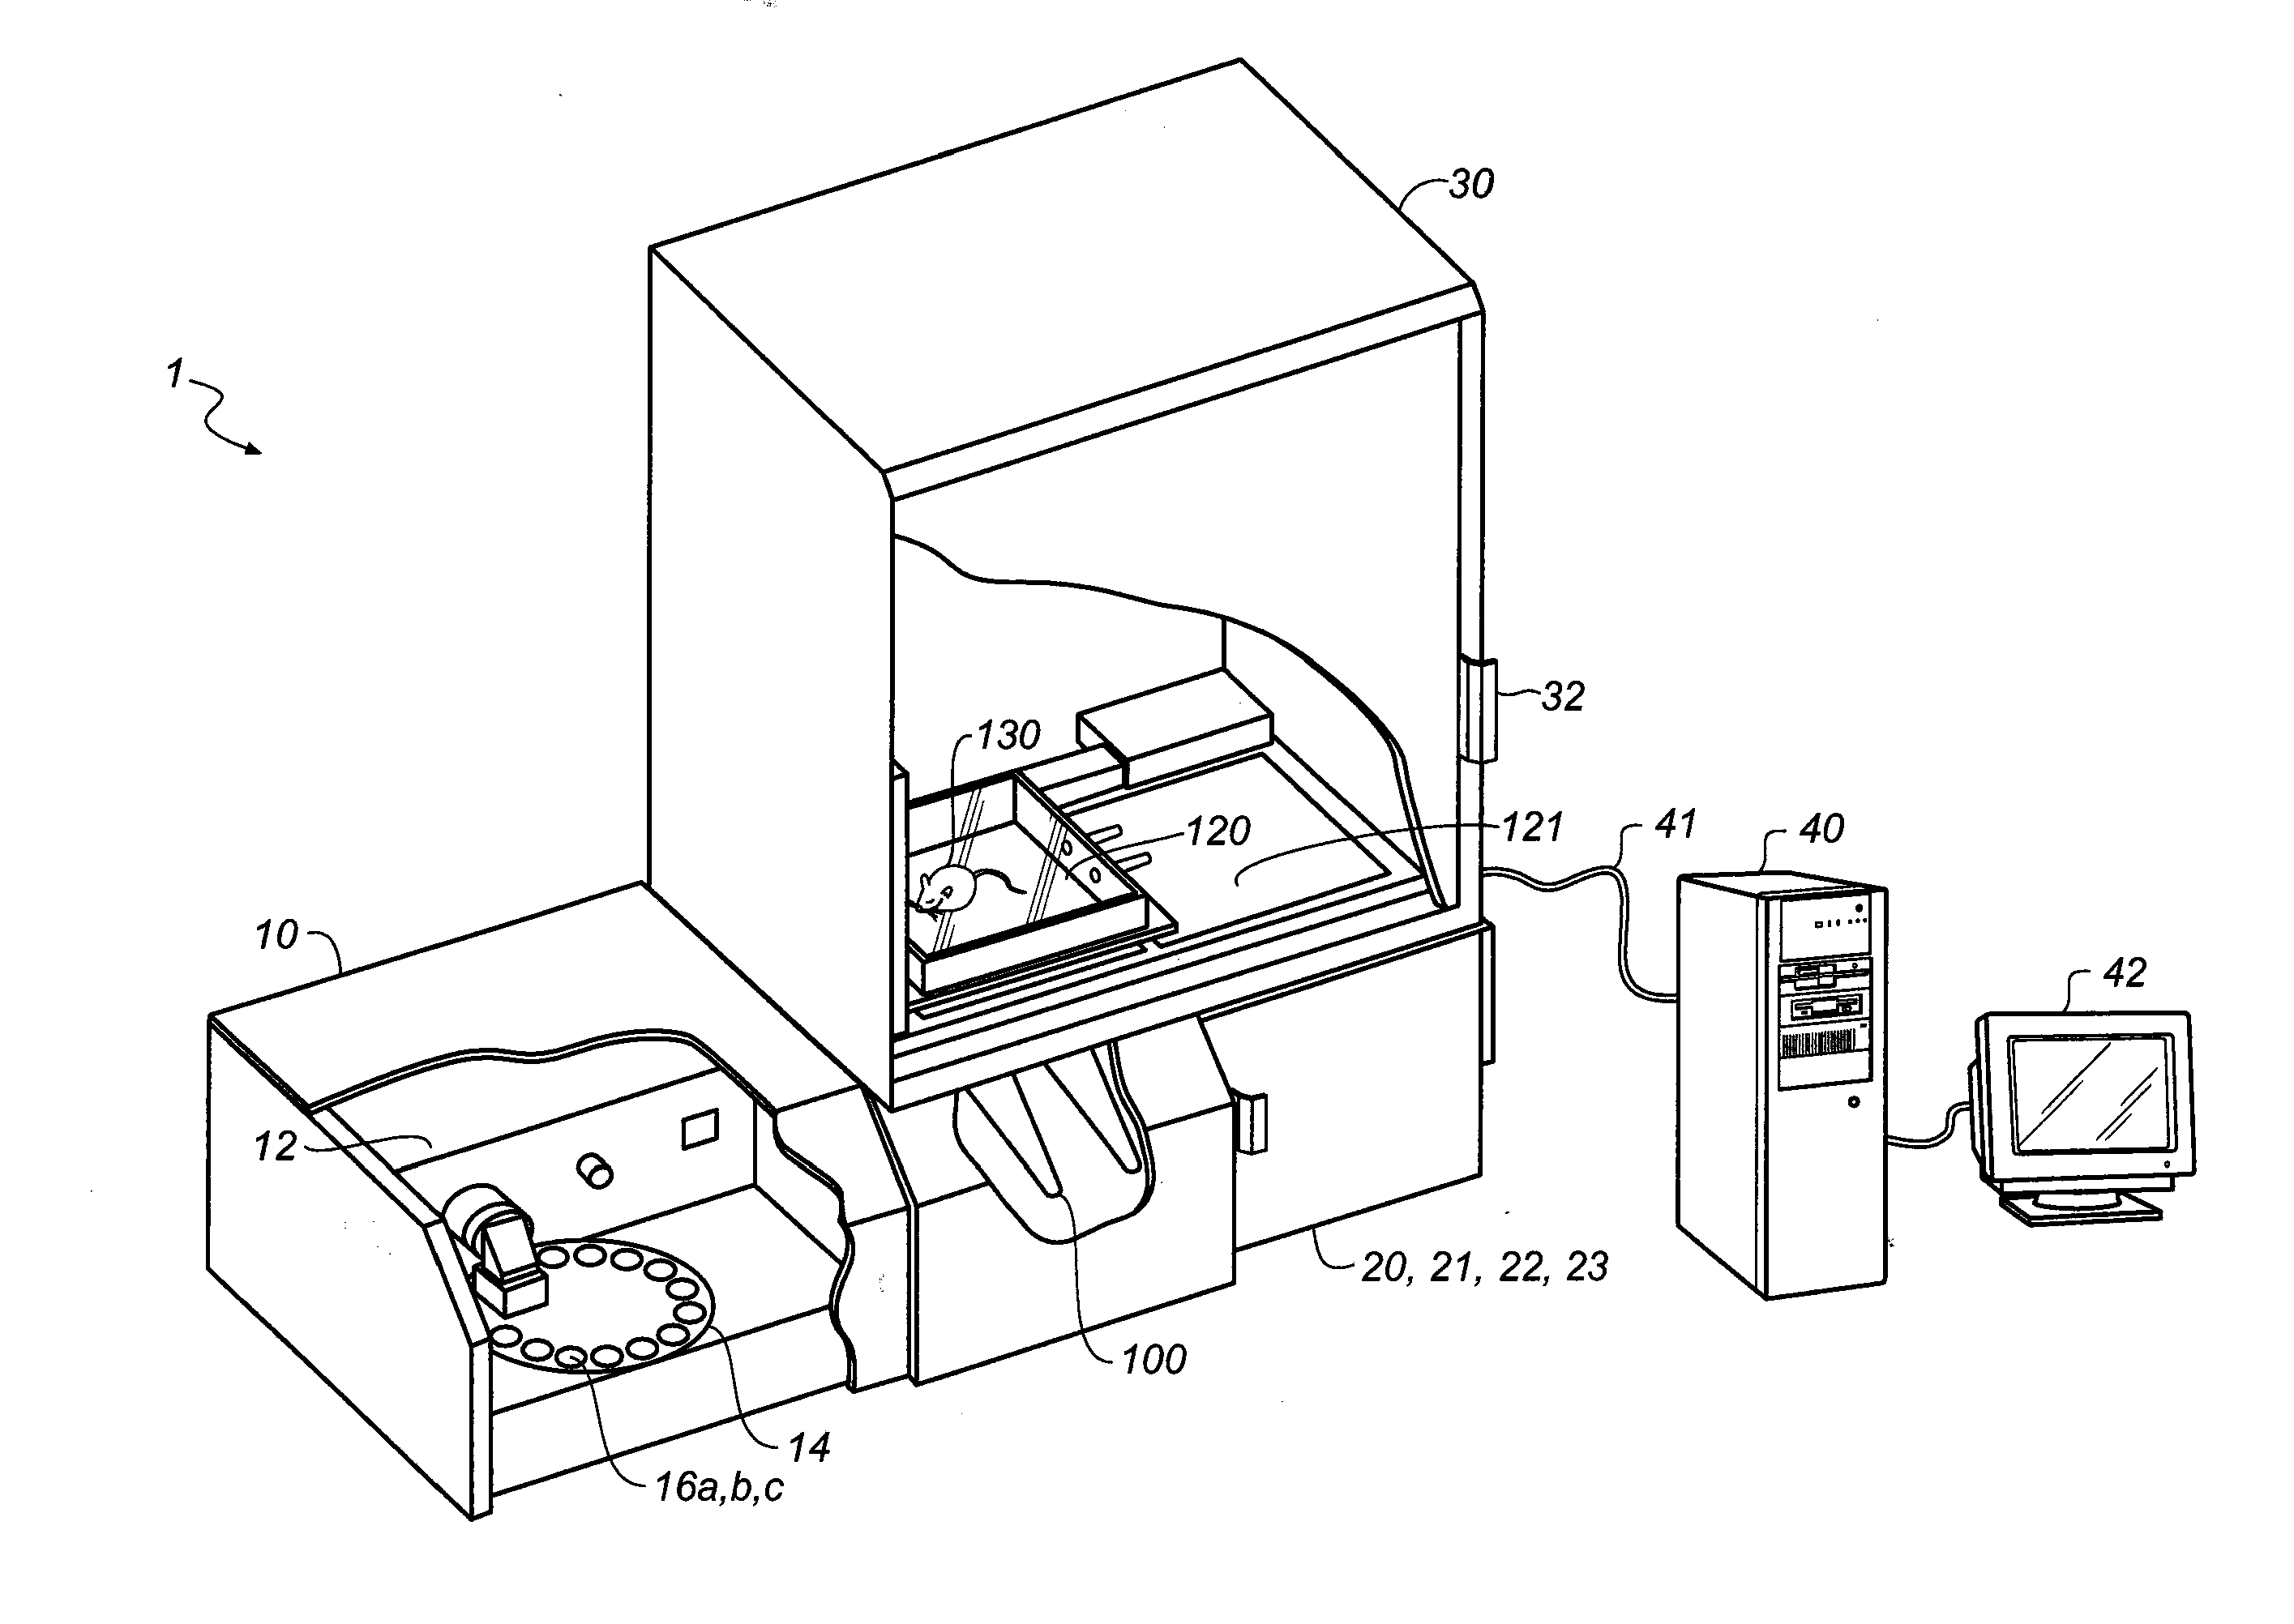 Apparatus and method for fluorescence imaging and tomography using spatially structured illumination